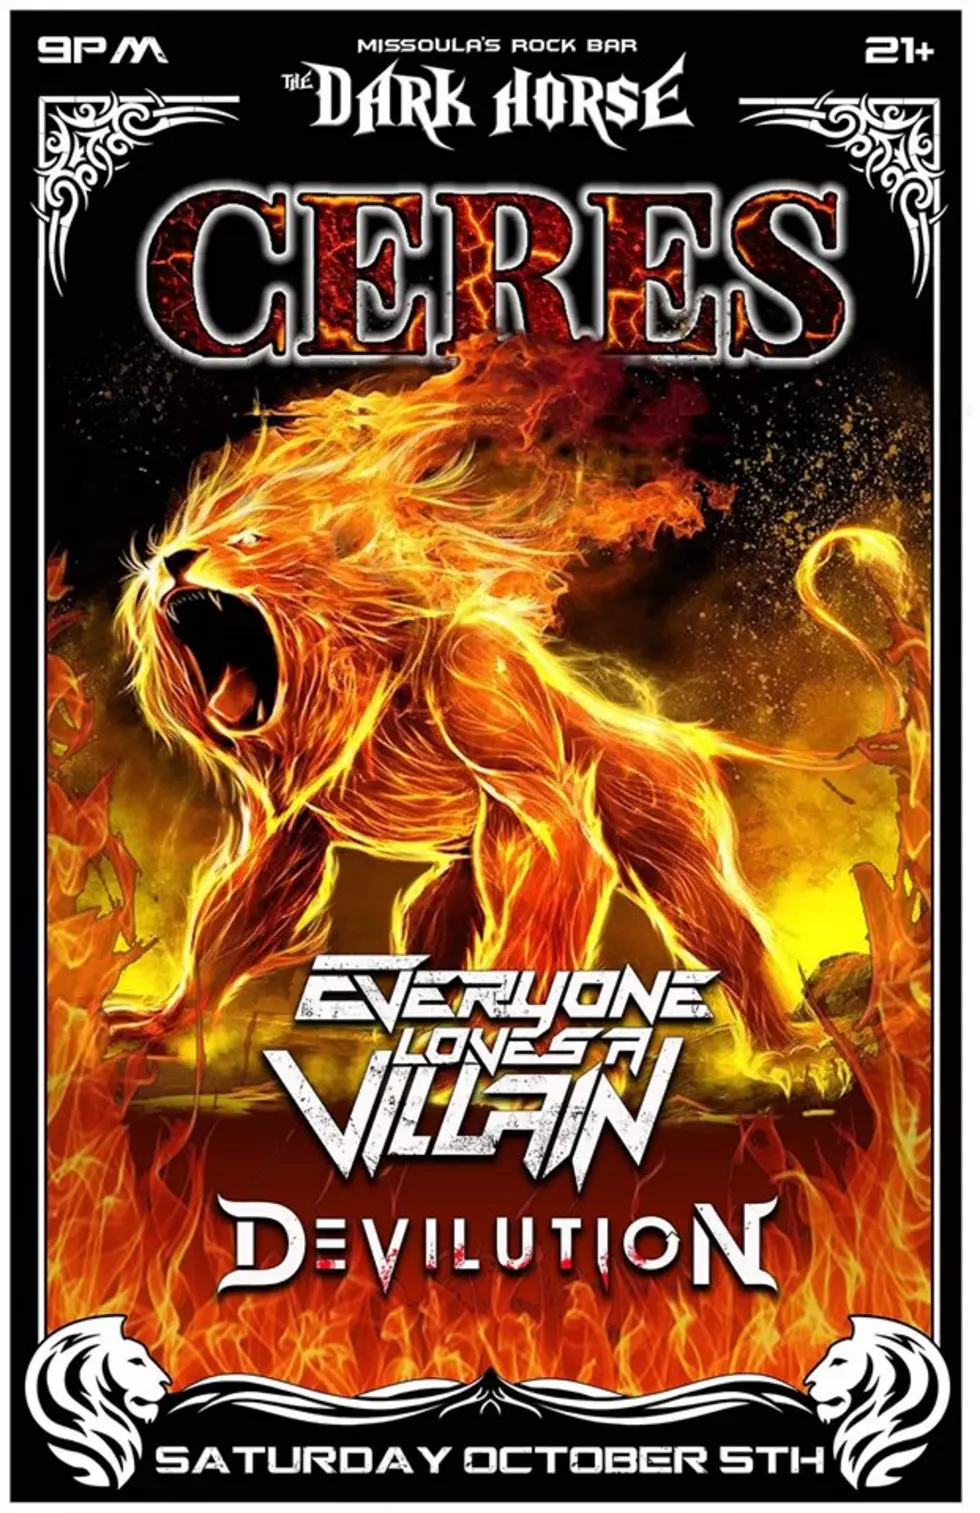 Homecoming Metal Show featuring Ceres, Devilution and Everyone Loves a Villain